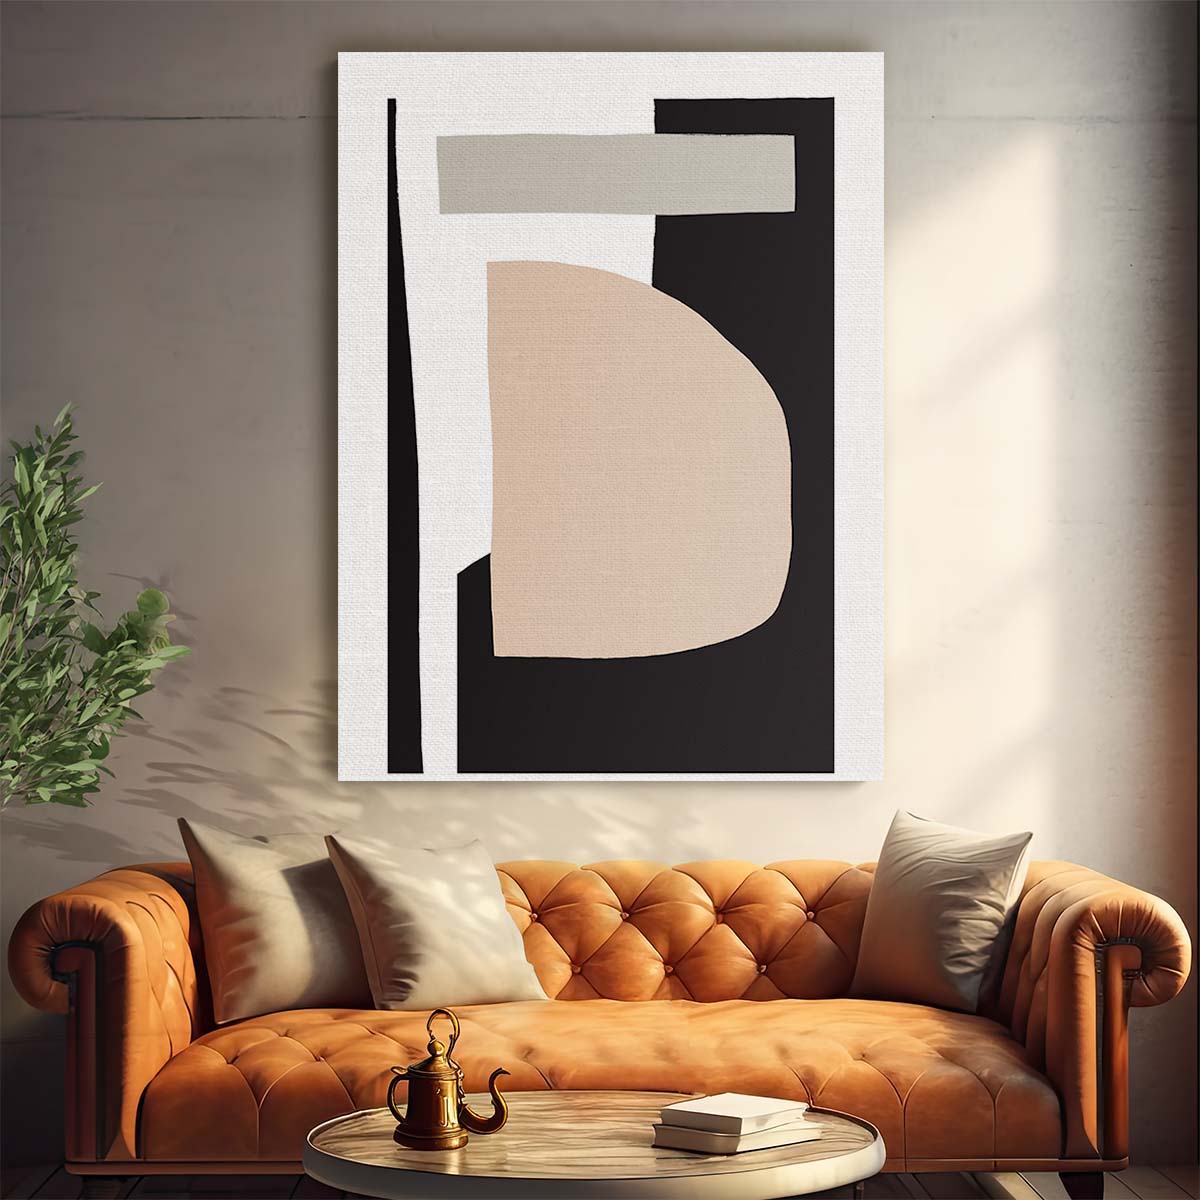 Abstract Illustration Artwork in Beige, Black, White by uplusmestudio by Luxuriance Designs, made in USA